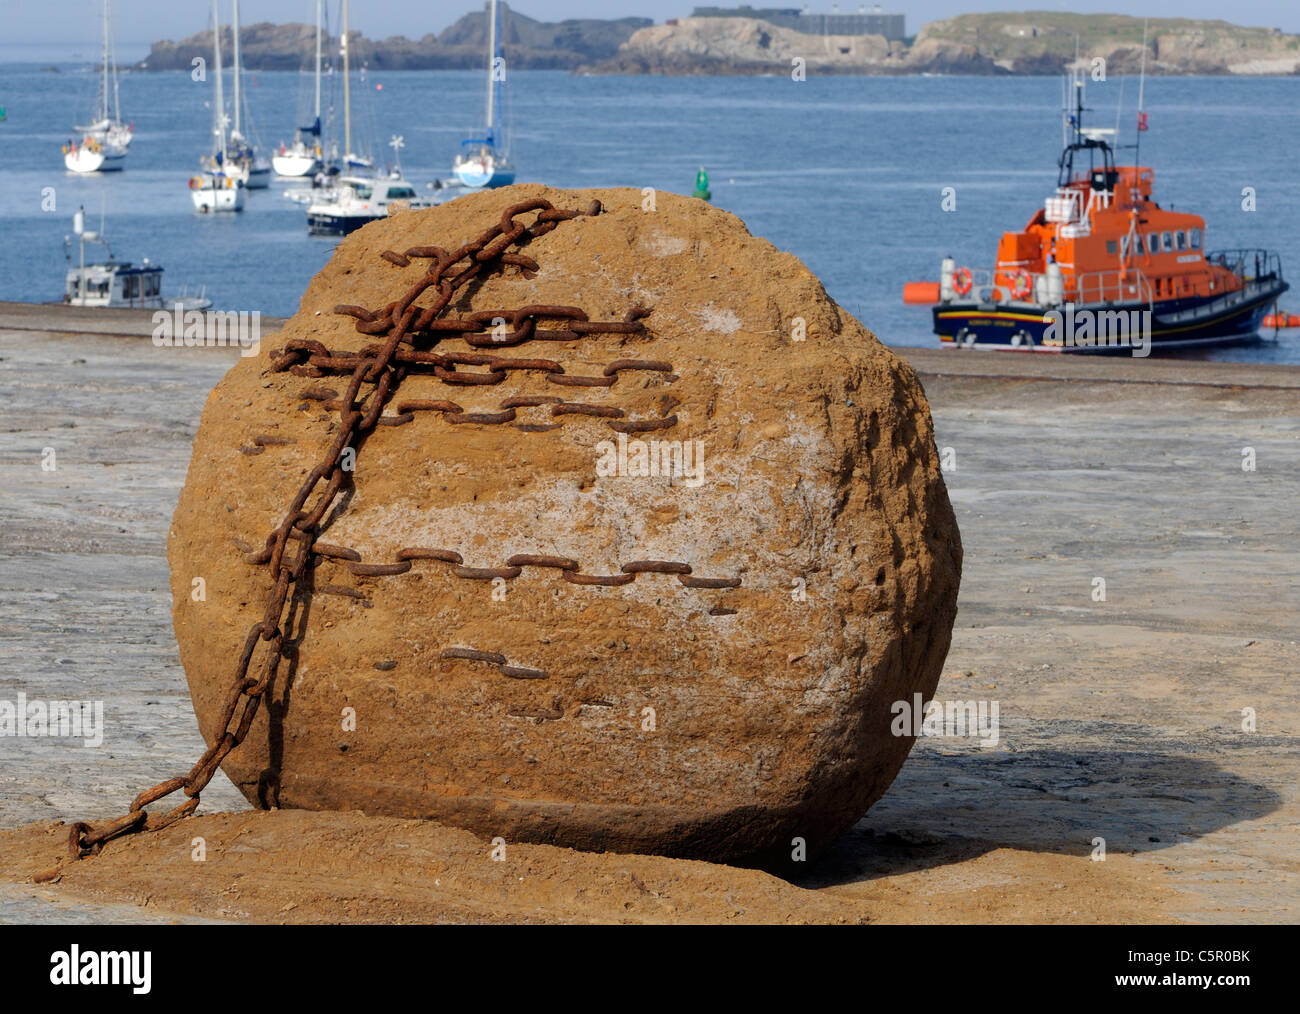 One of Andy Goldsworthy’s Alderney Stones disintegrates to reveal rusty chains. Alderney, Channel Islands, Stock Photo